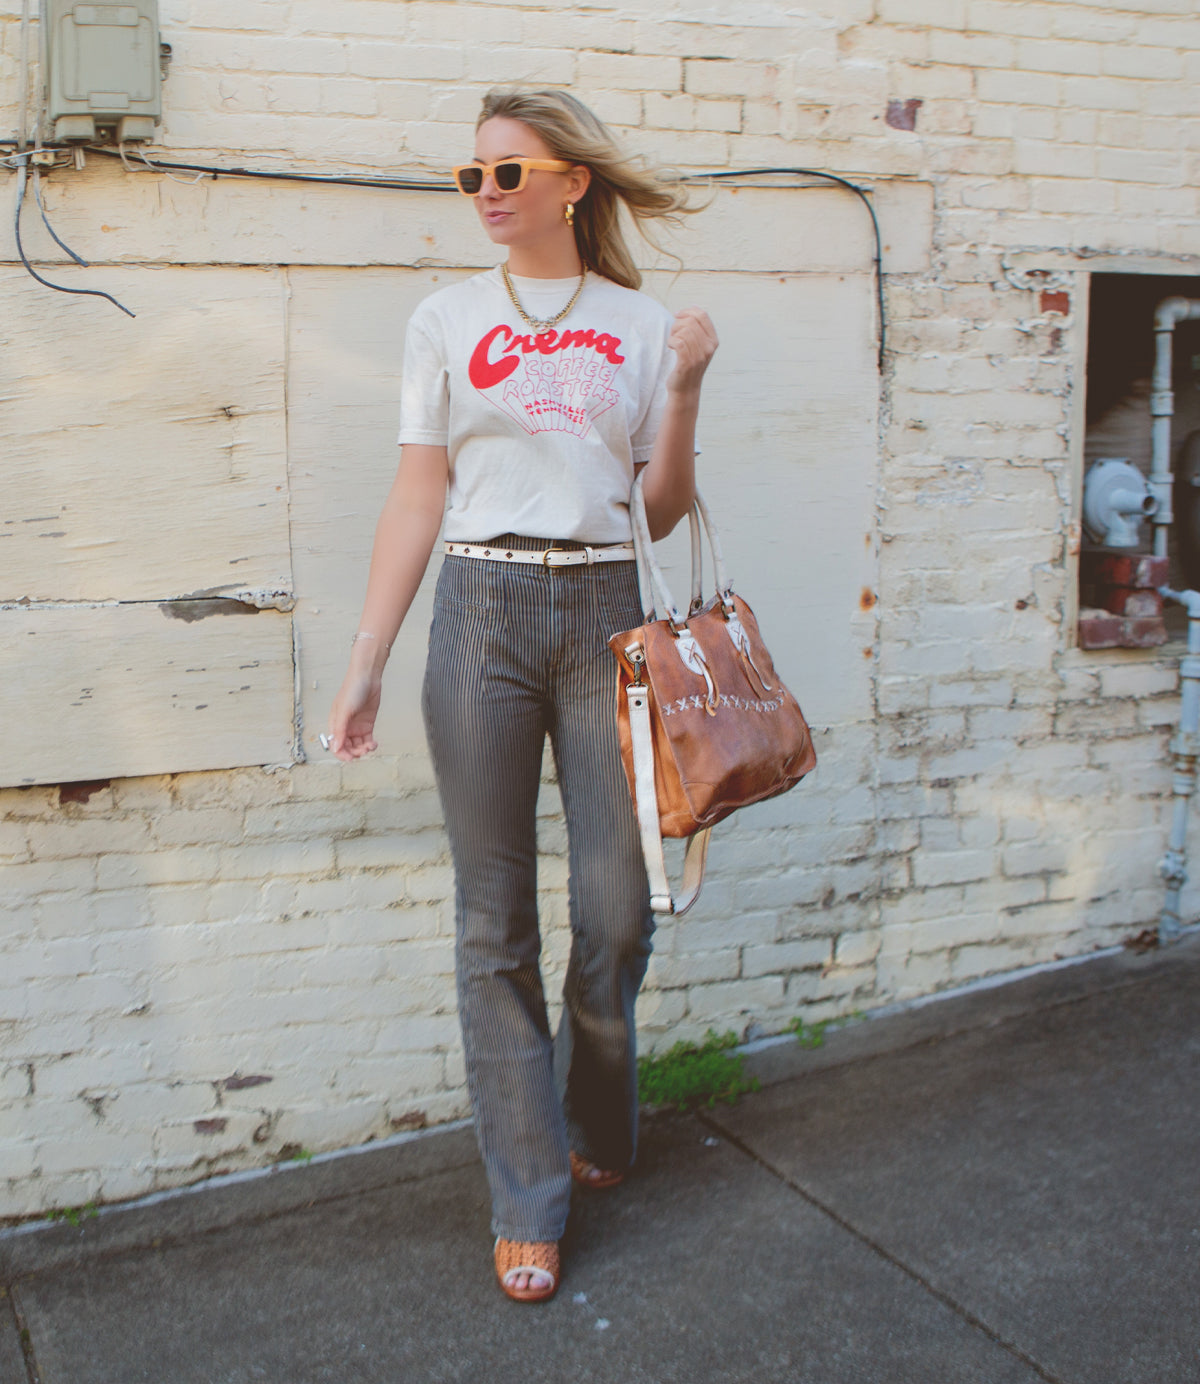 A woman in sunglasses wearing a white t-shirt and striped trousers carries a Bed Stu Bruna two-toned leather bag with shoulder straps while walking past a white brick wall.